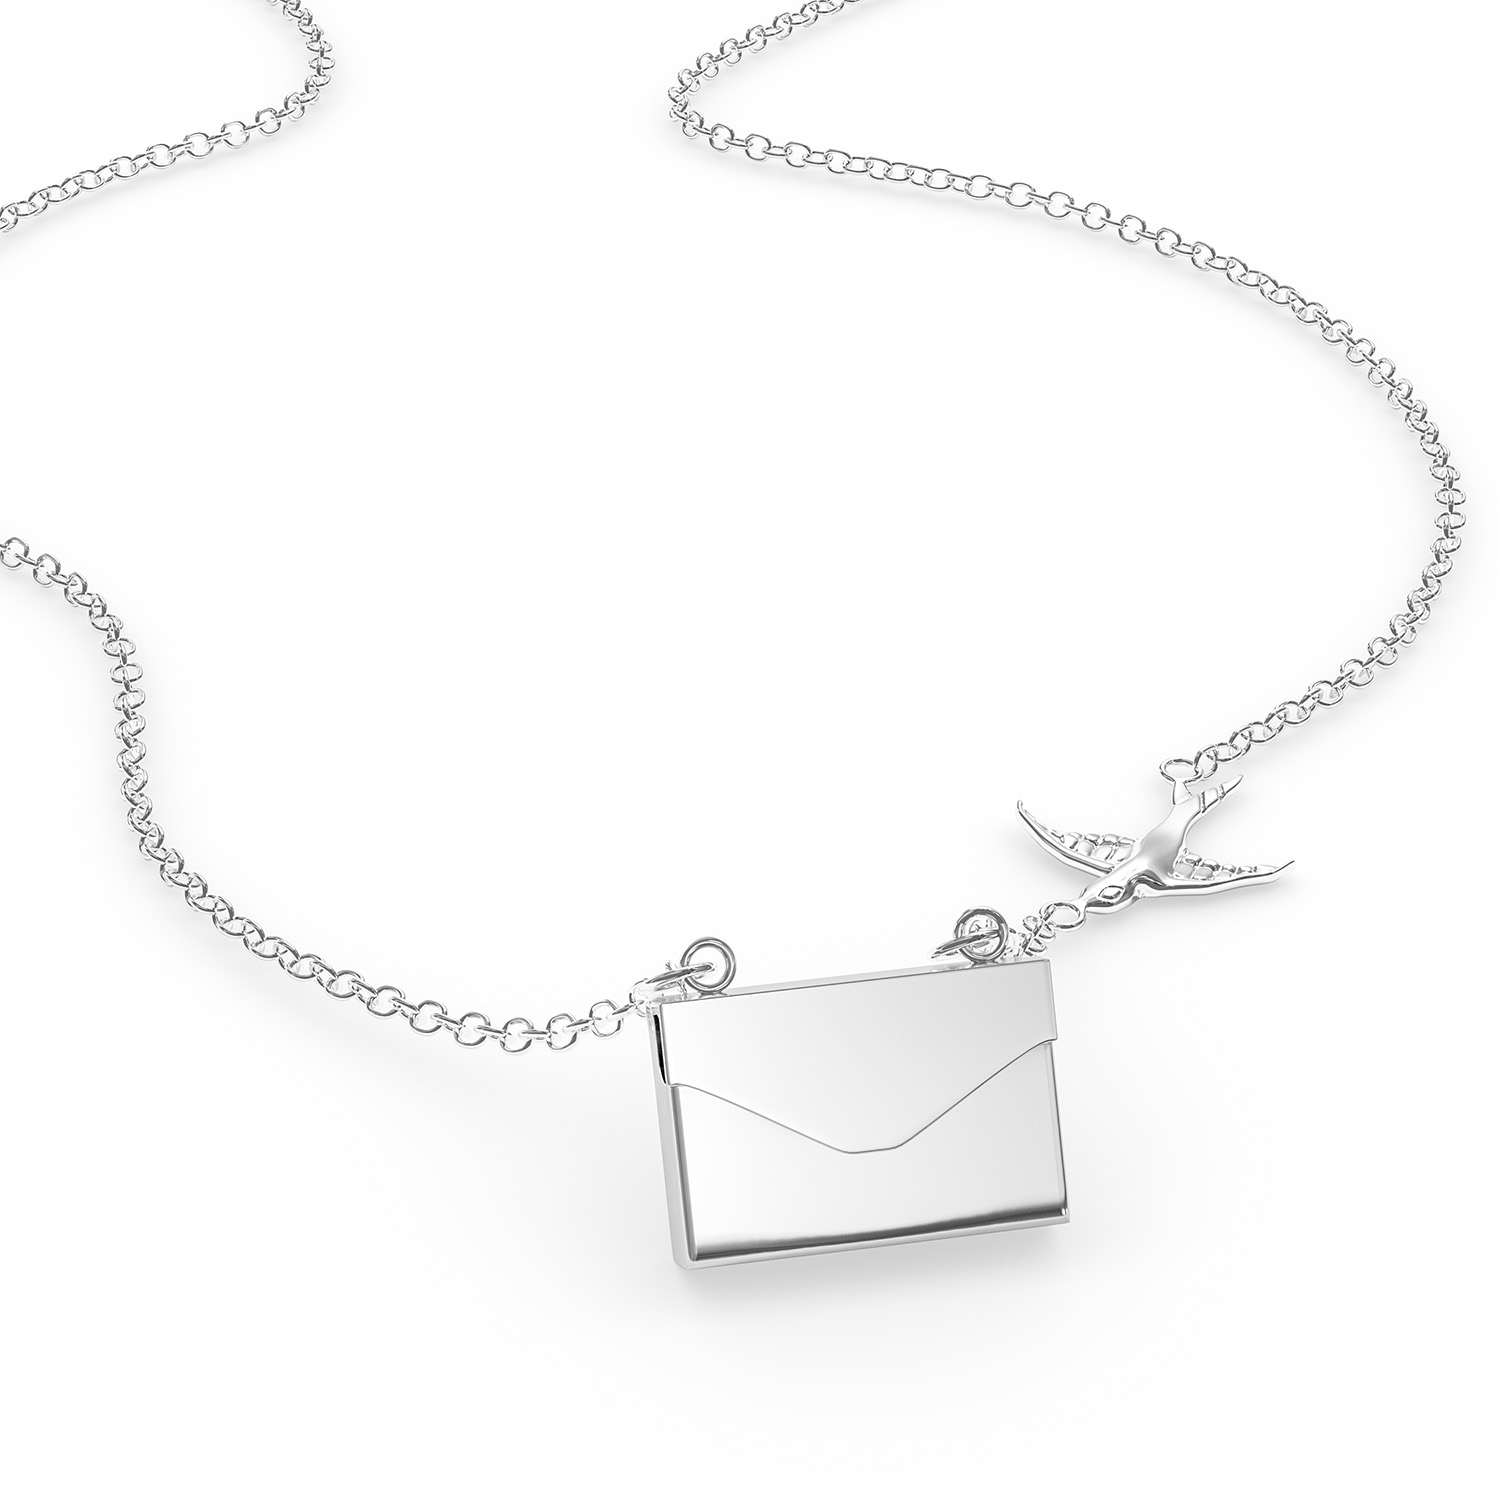 Locket Necklace Leo Star Constellation Zodiac Sign in a silver Envelope Neonblond - image 3 of 5